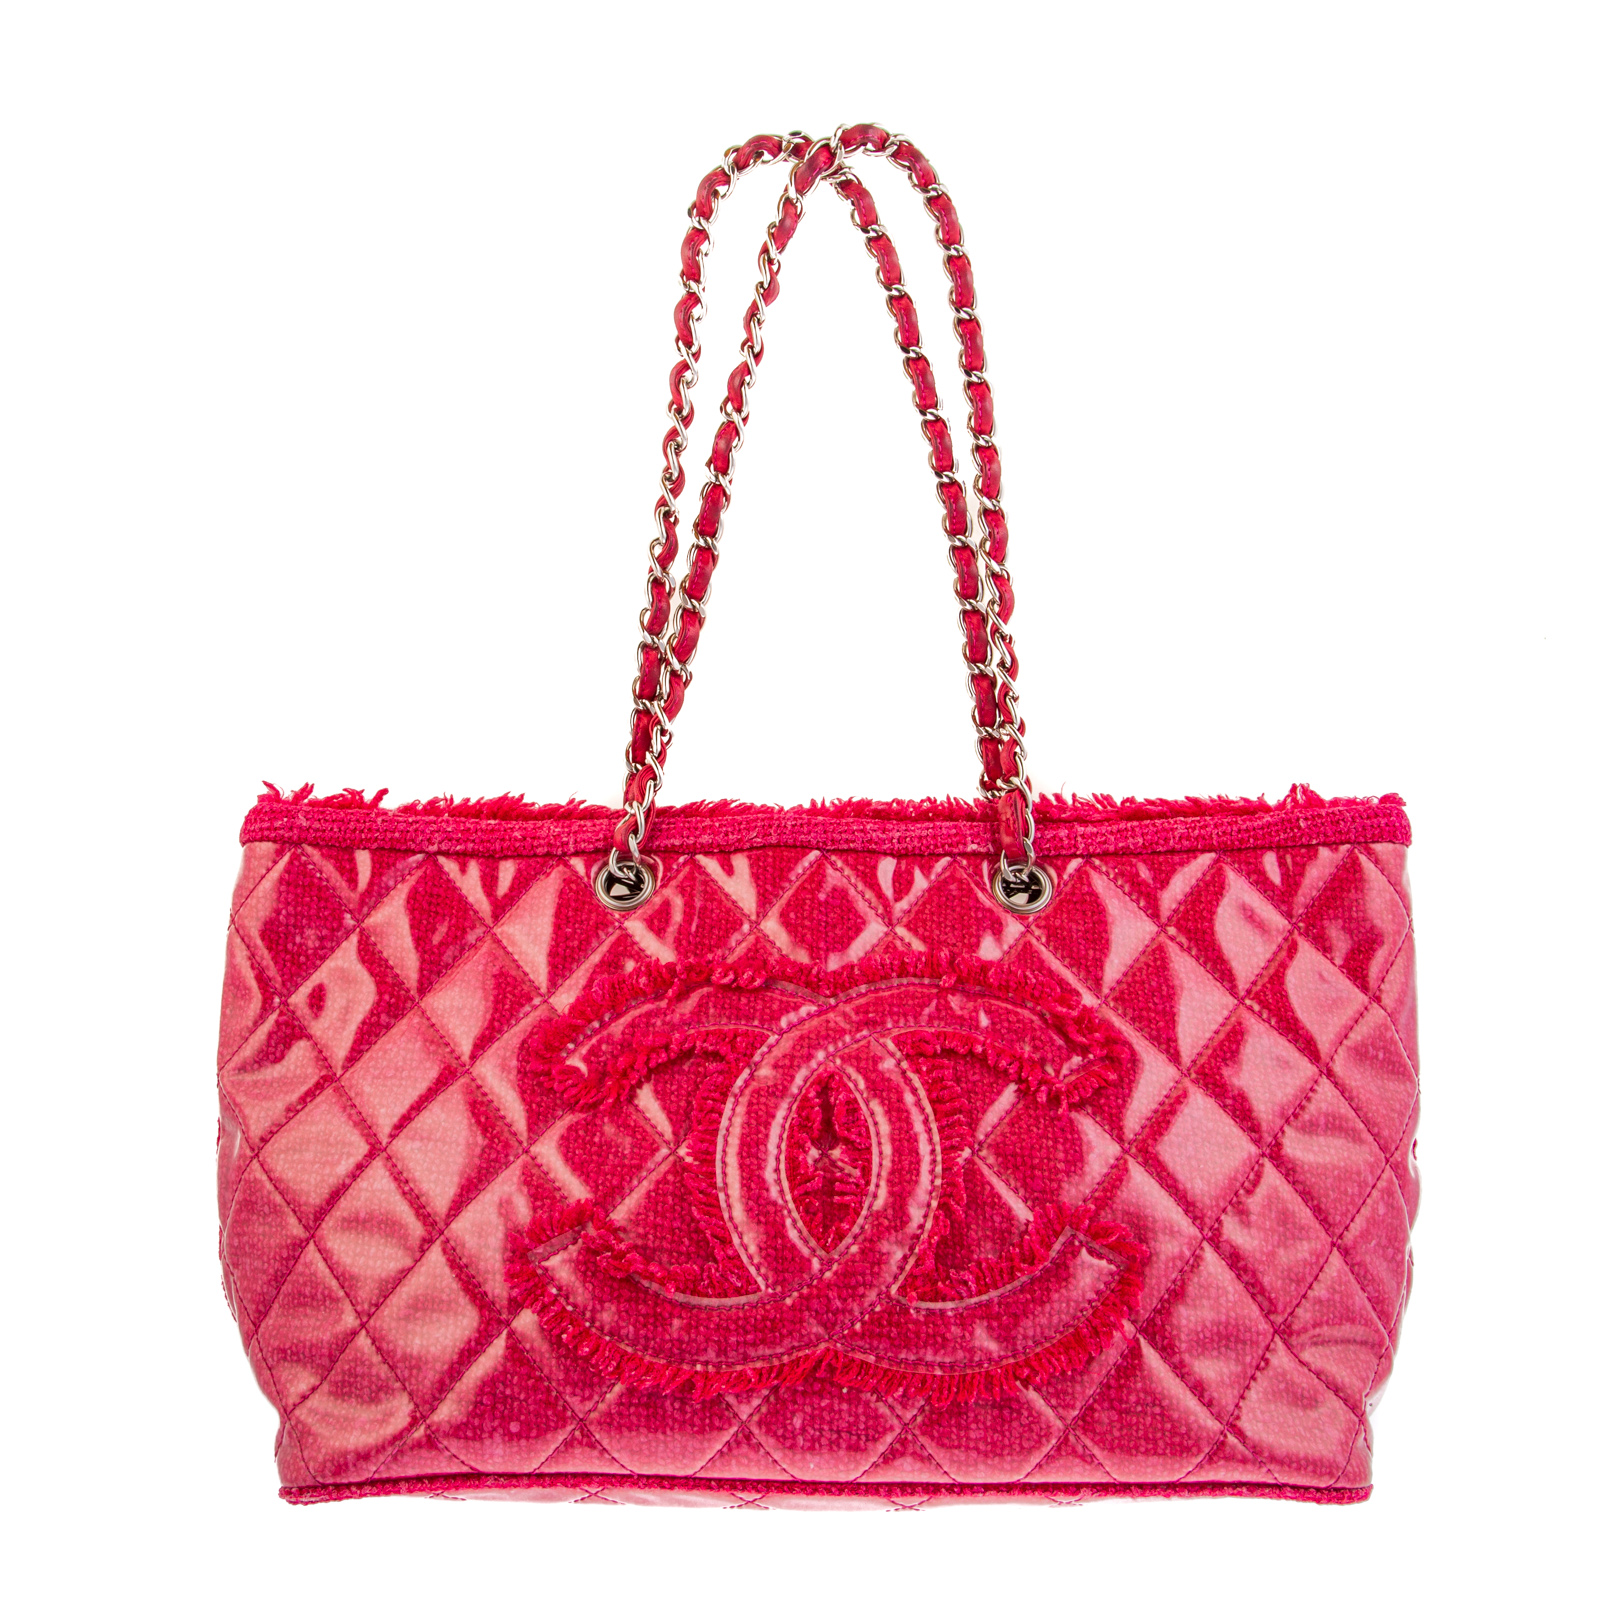 A CHANEL CC FUNNY TWEED TOTE A